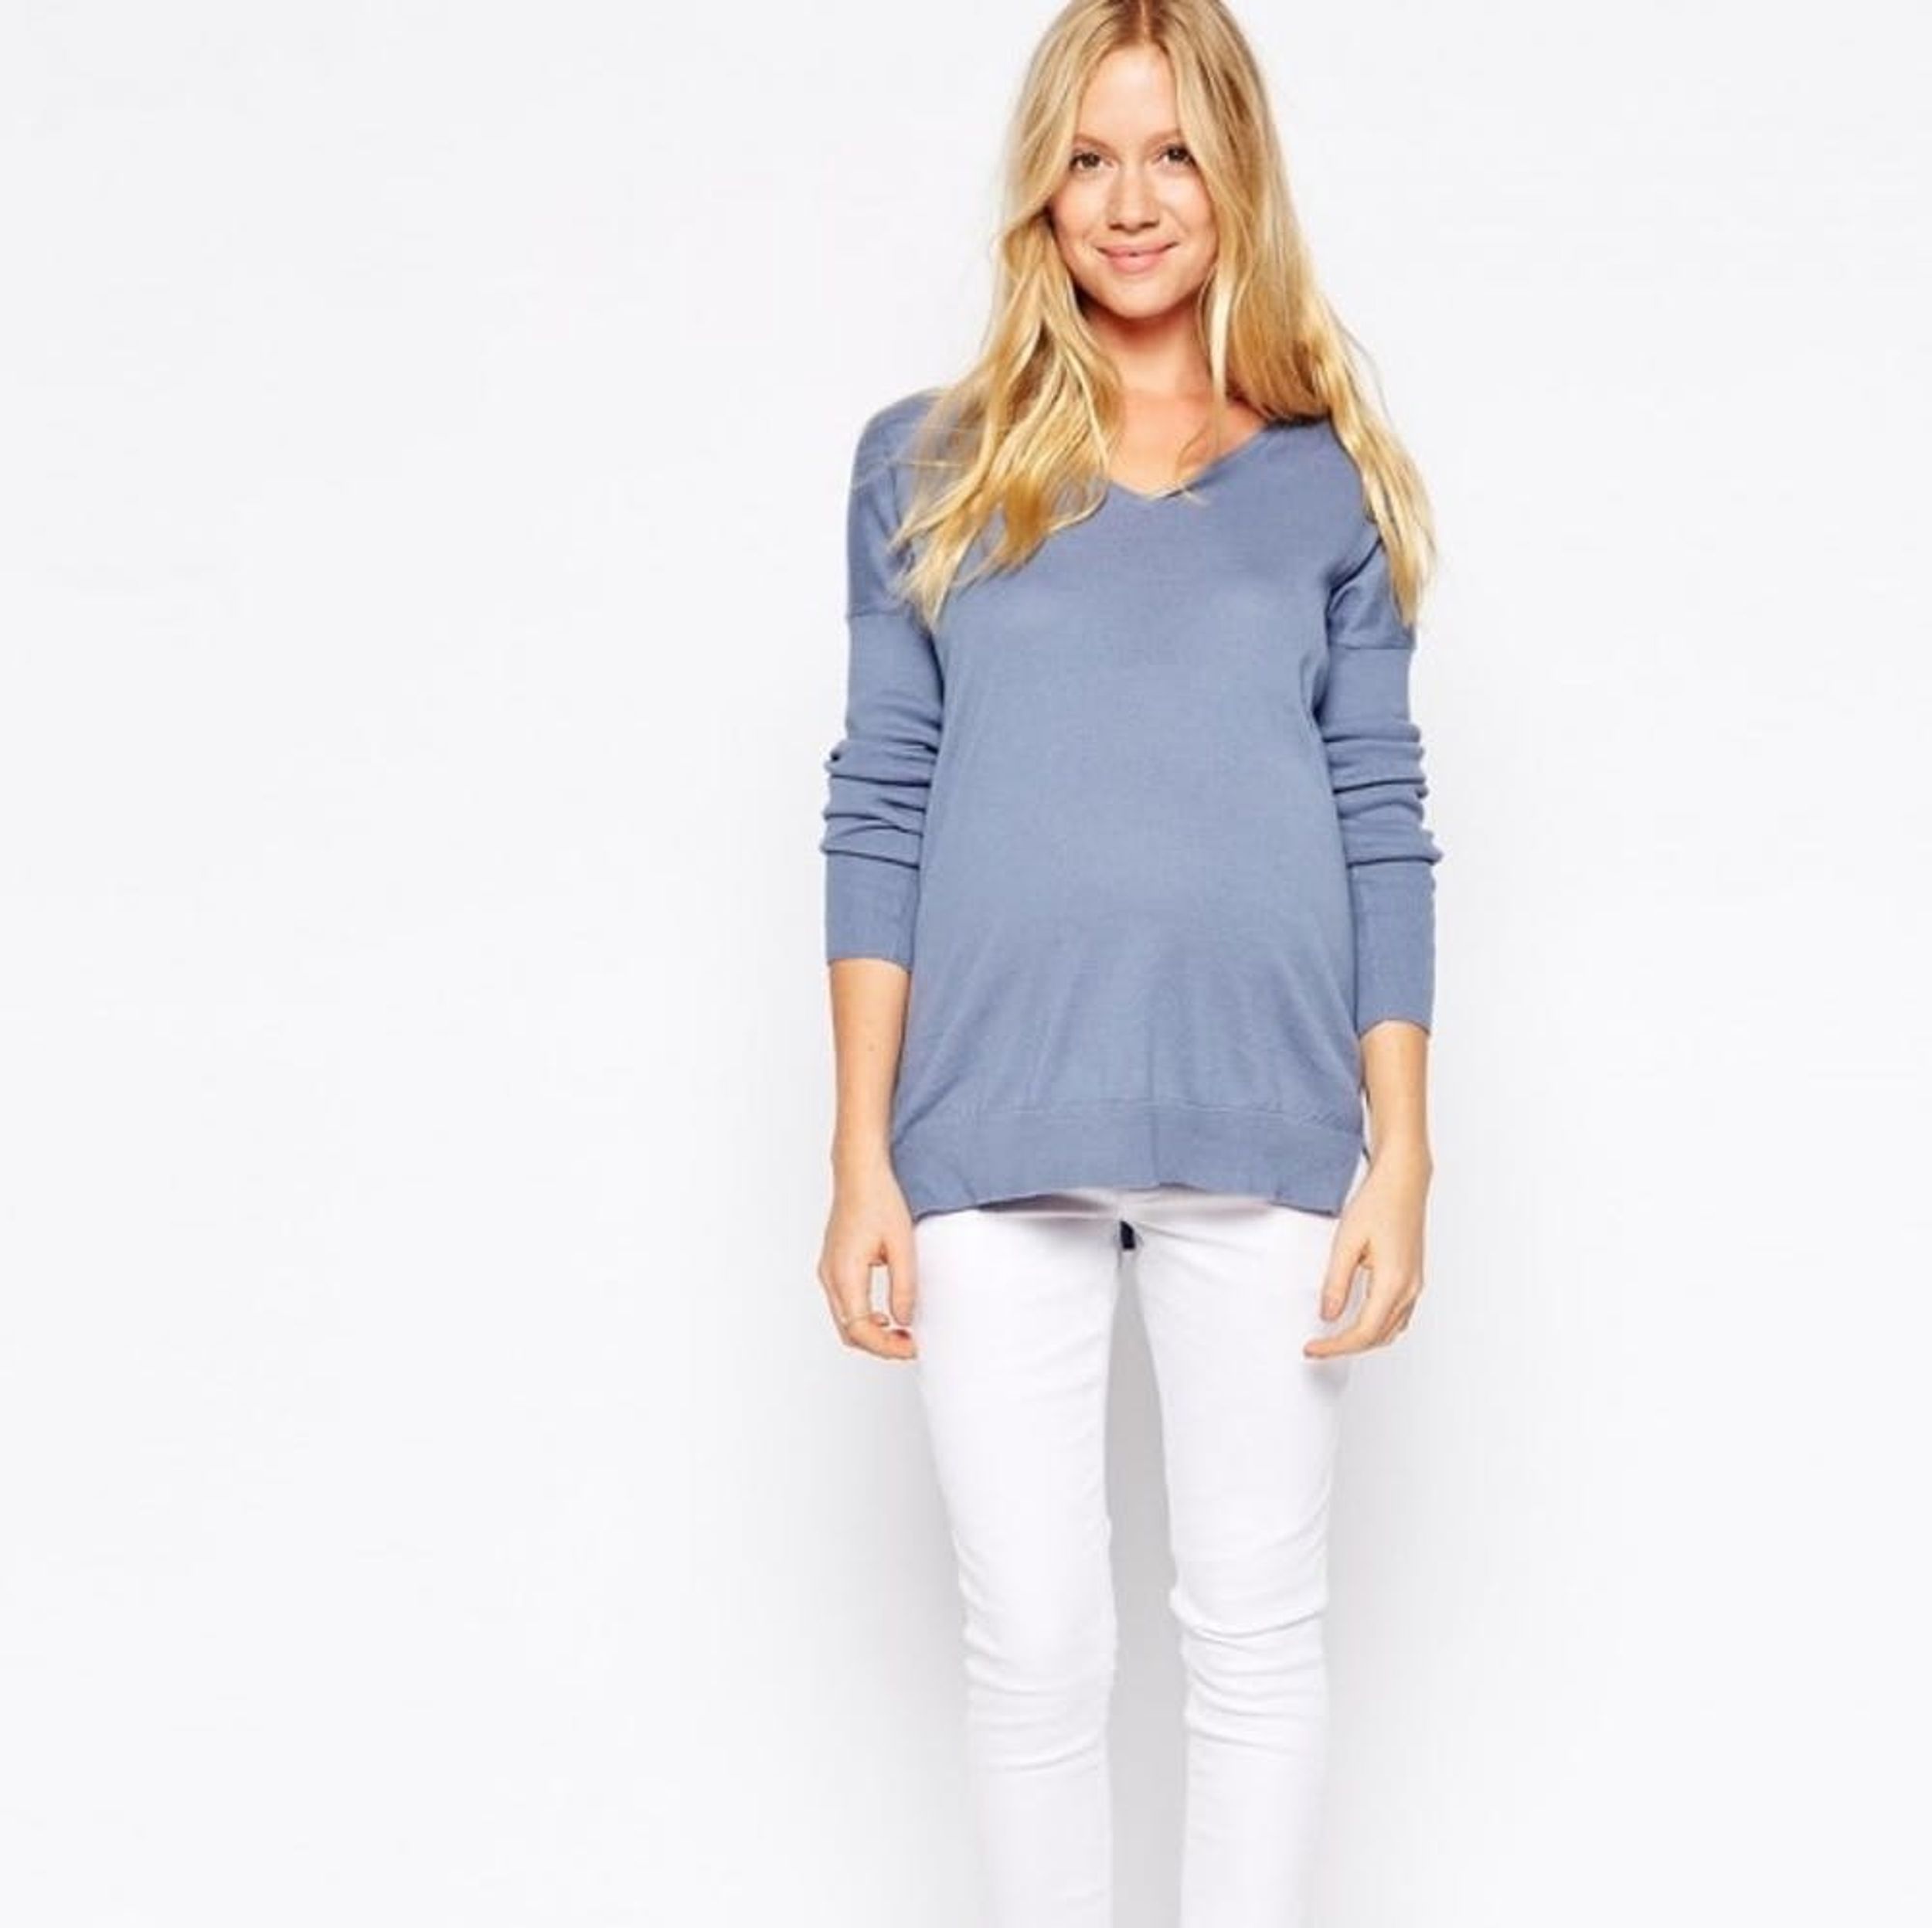 13 Stylish Maternity Jeans to Keep You Looking (and Feeling) Great